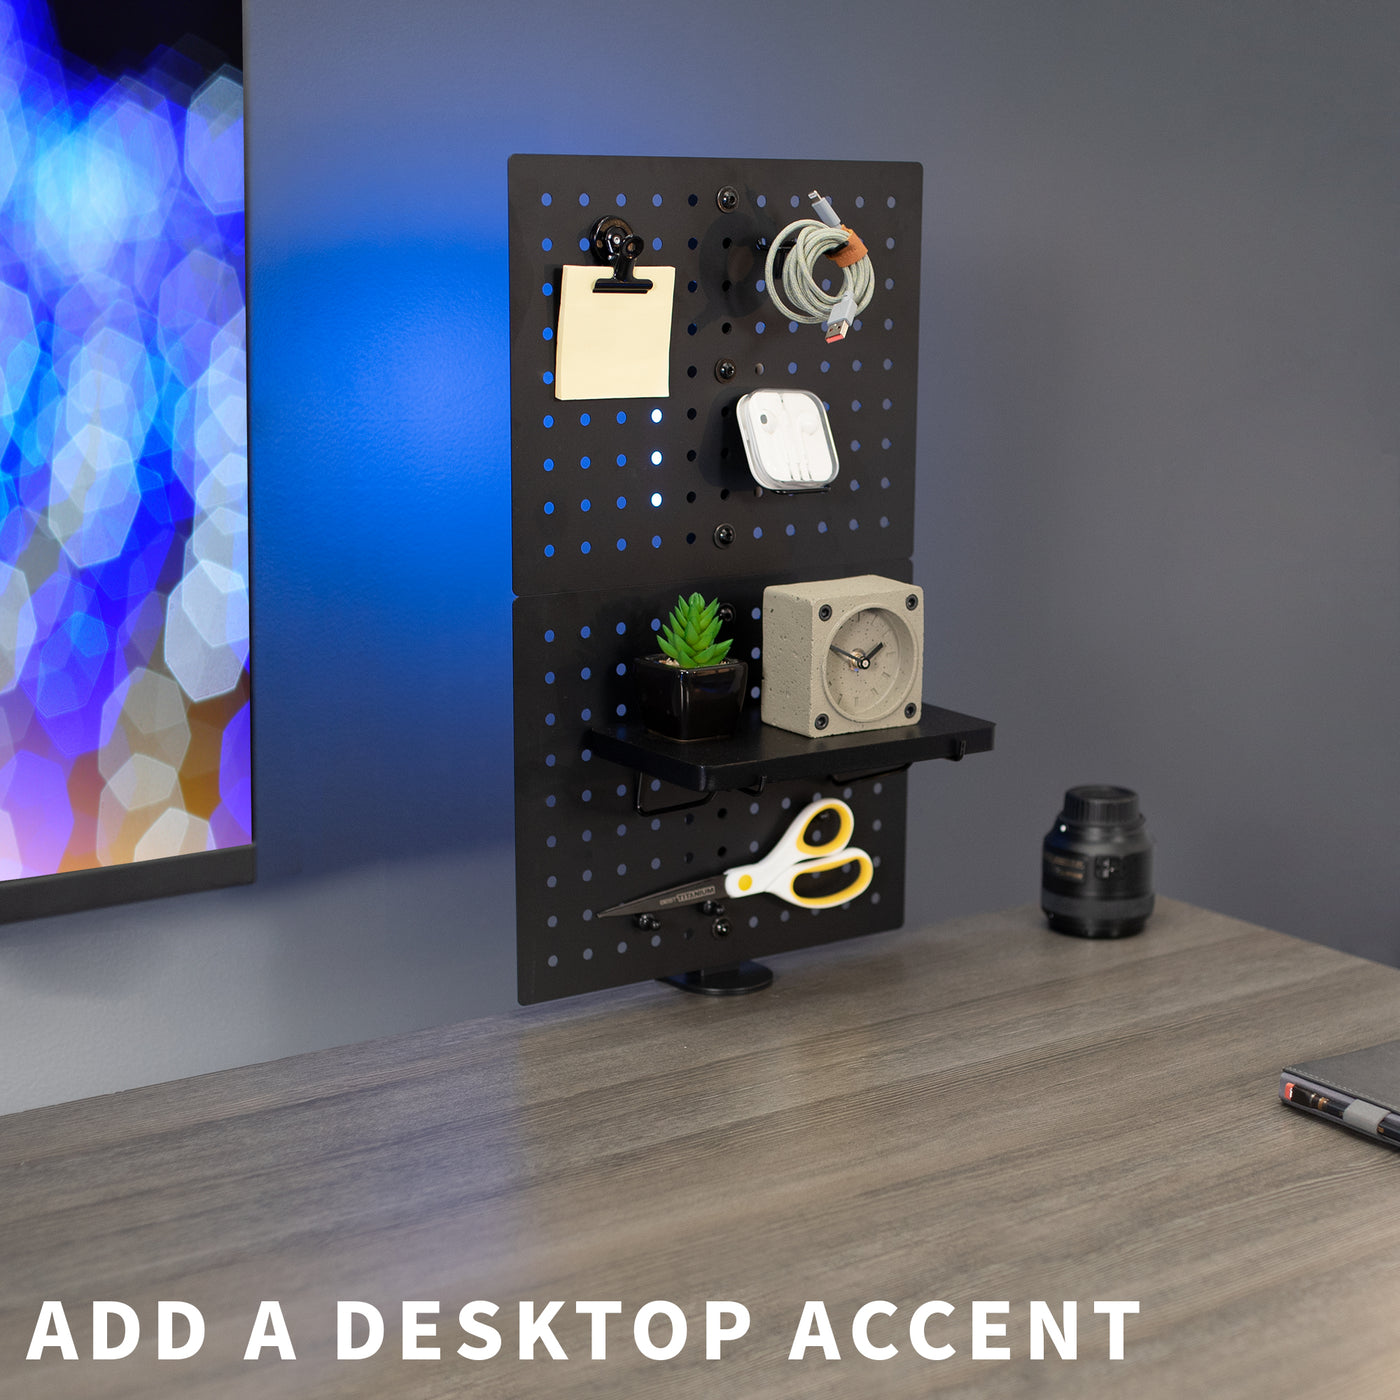 Clamp-on desk pegboard panel for privacy, decoration, and storage.